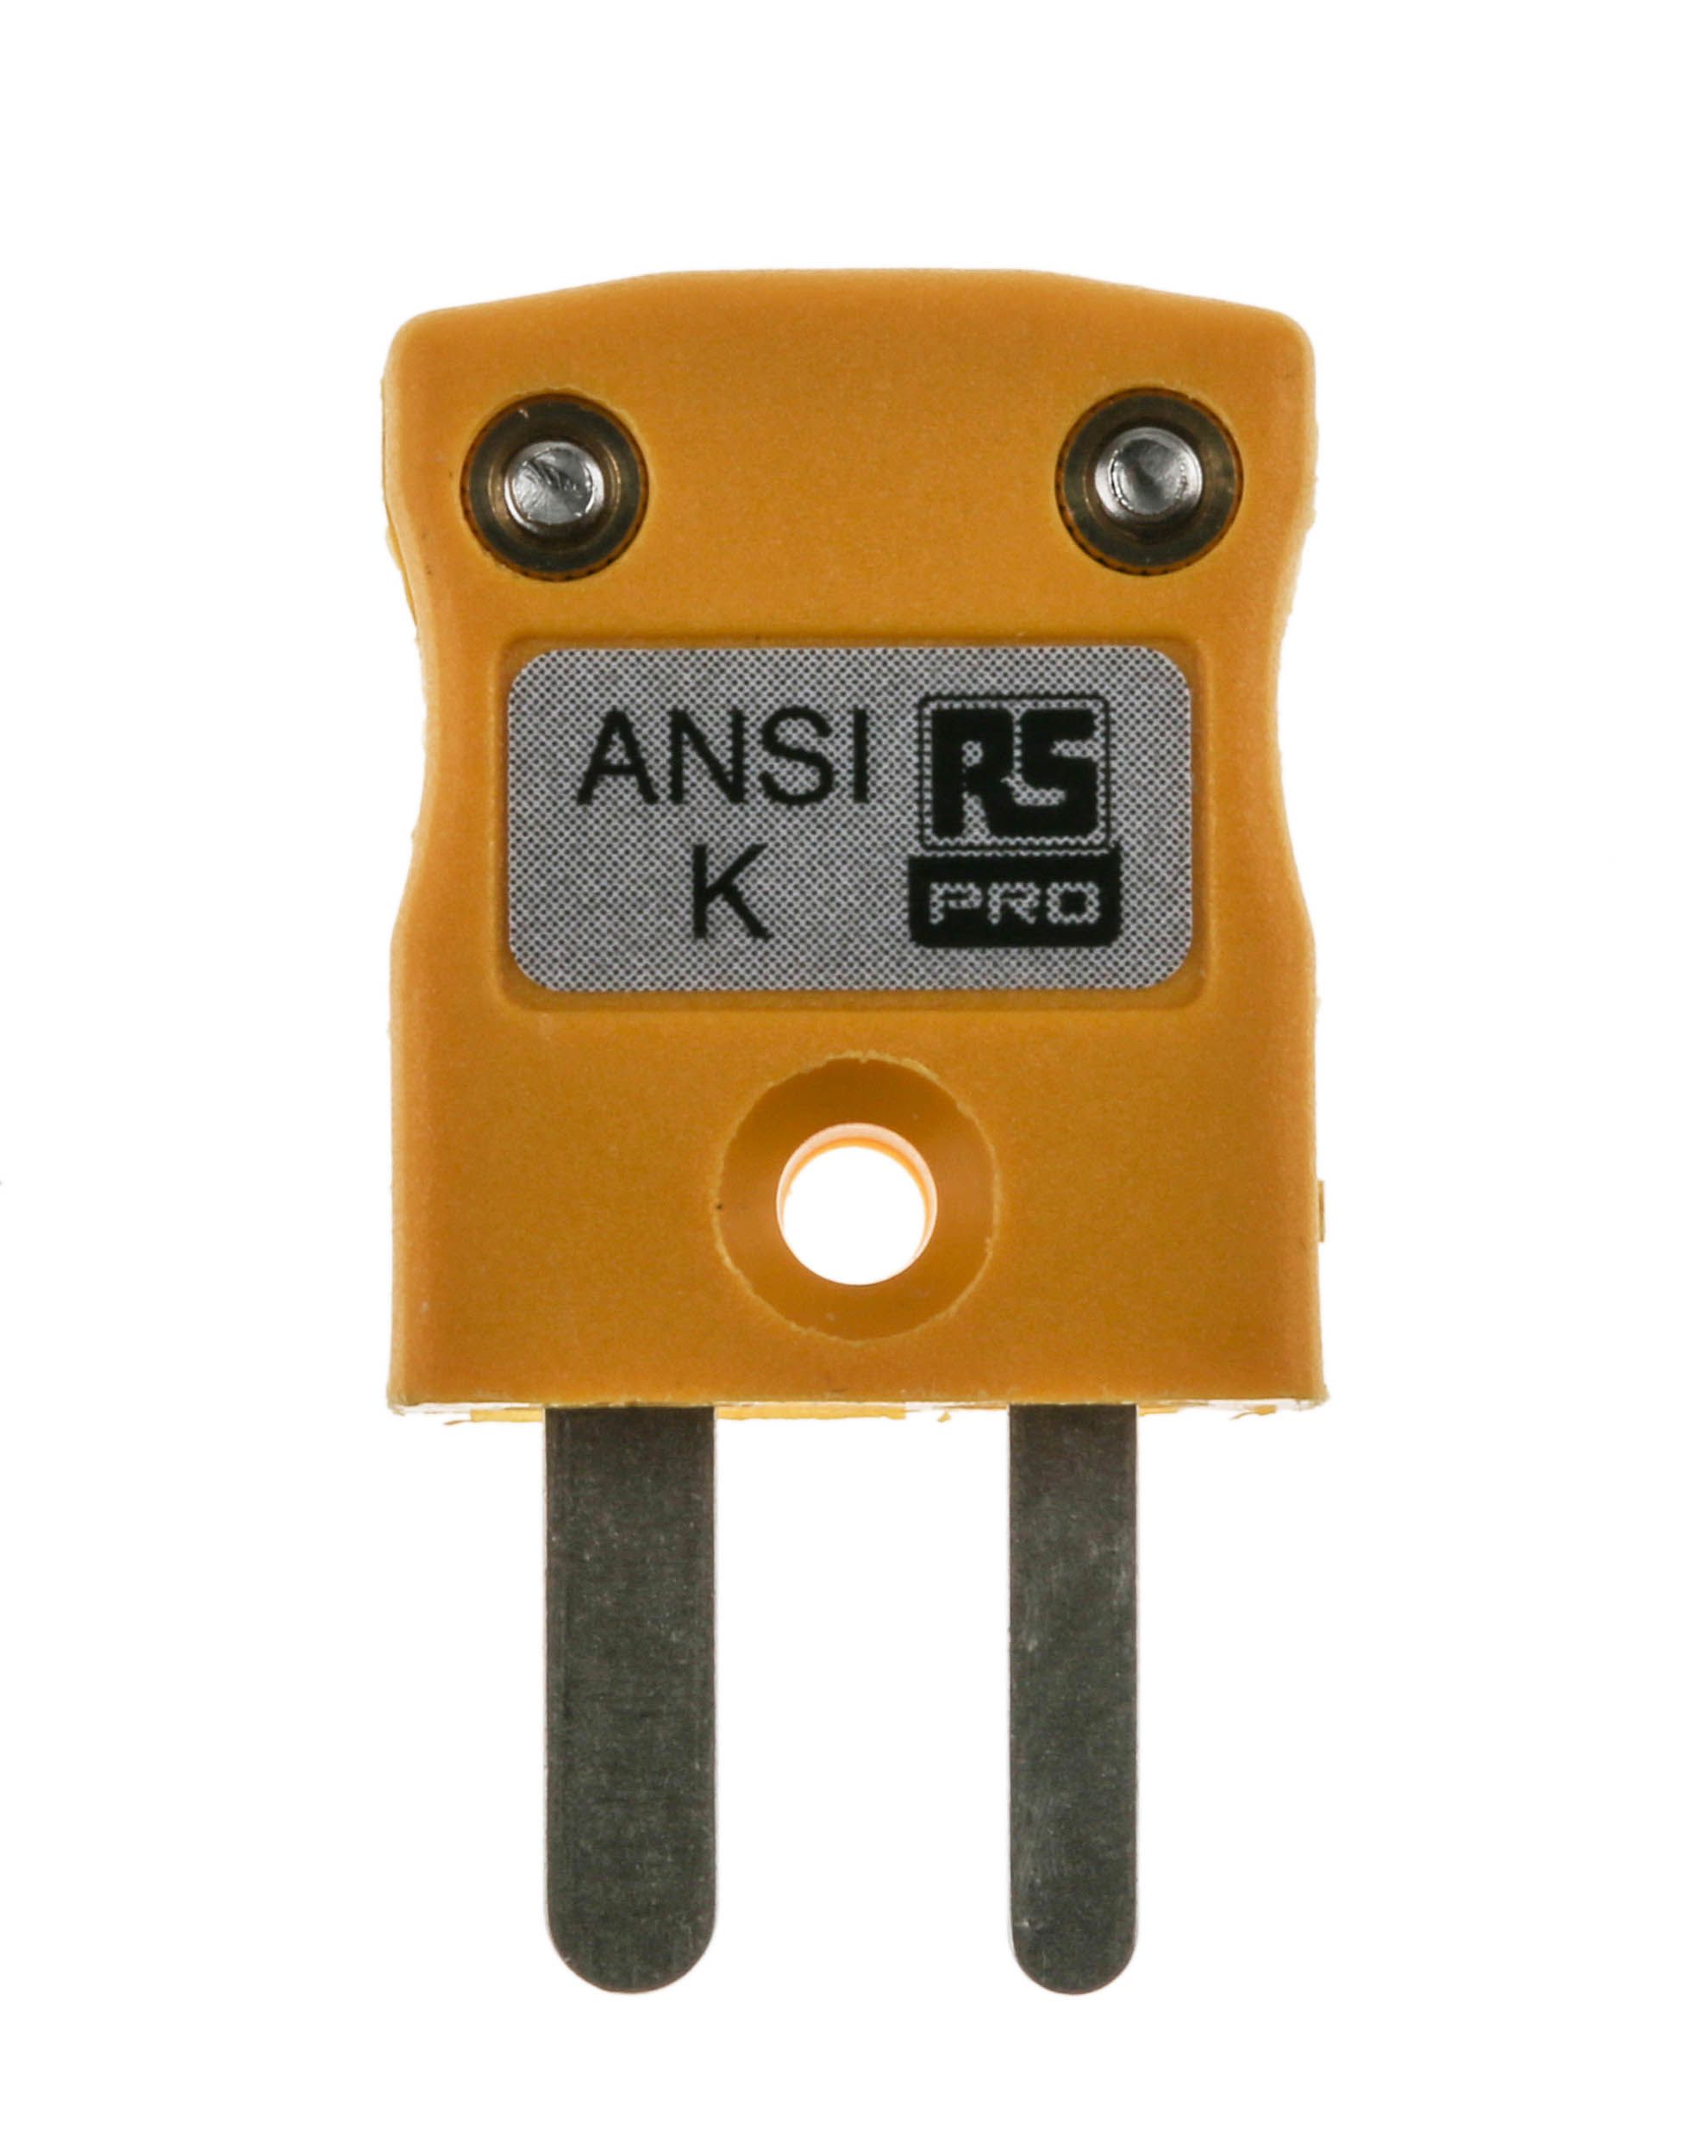 RS PRO In-Line Thermocouple Connector for Use with Type K Thermocouple, Miniature, ANSI Standard